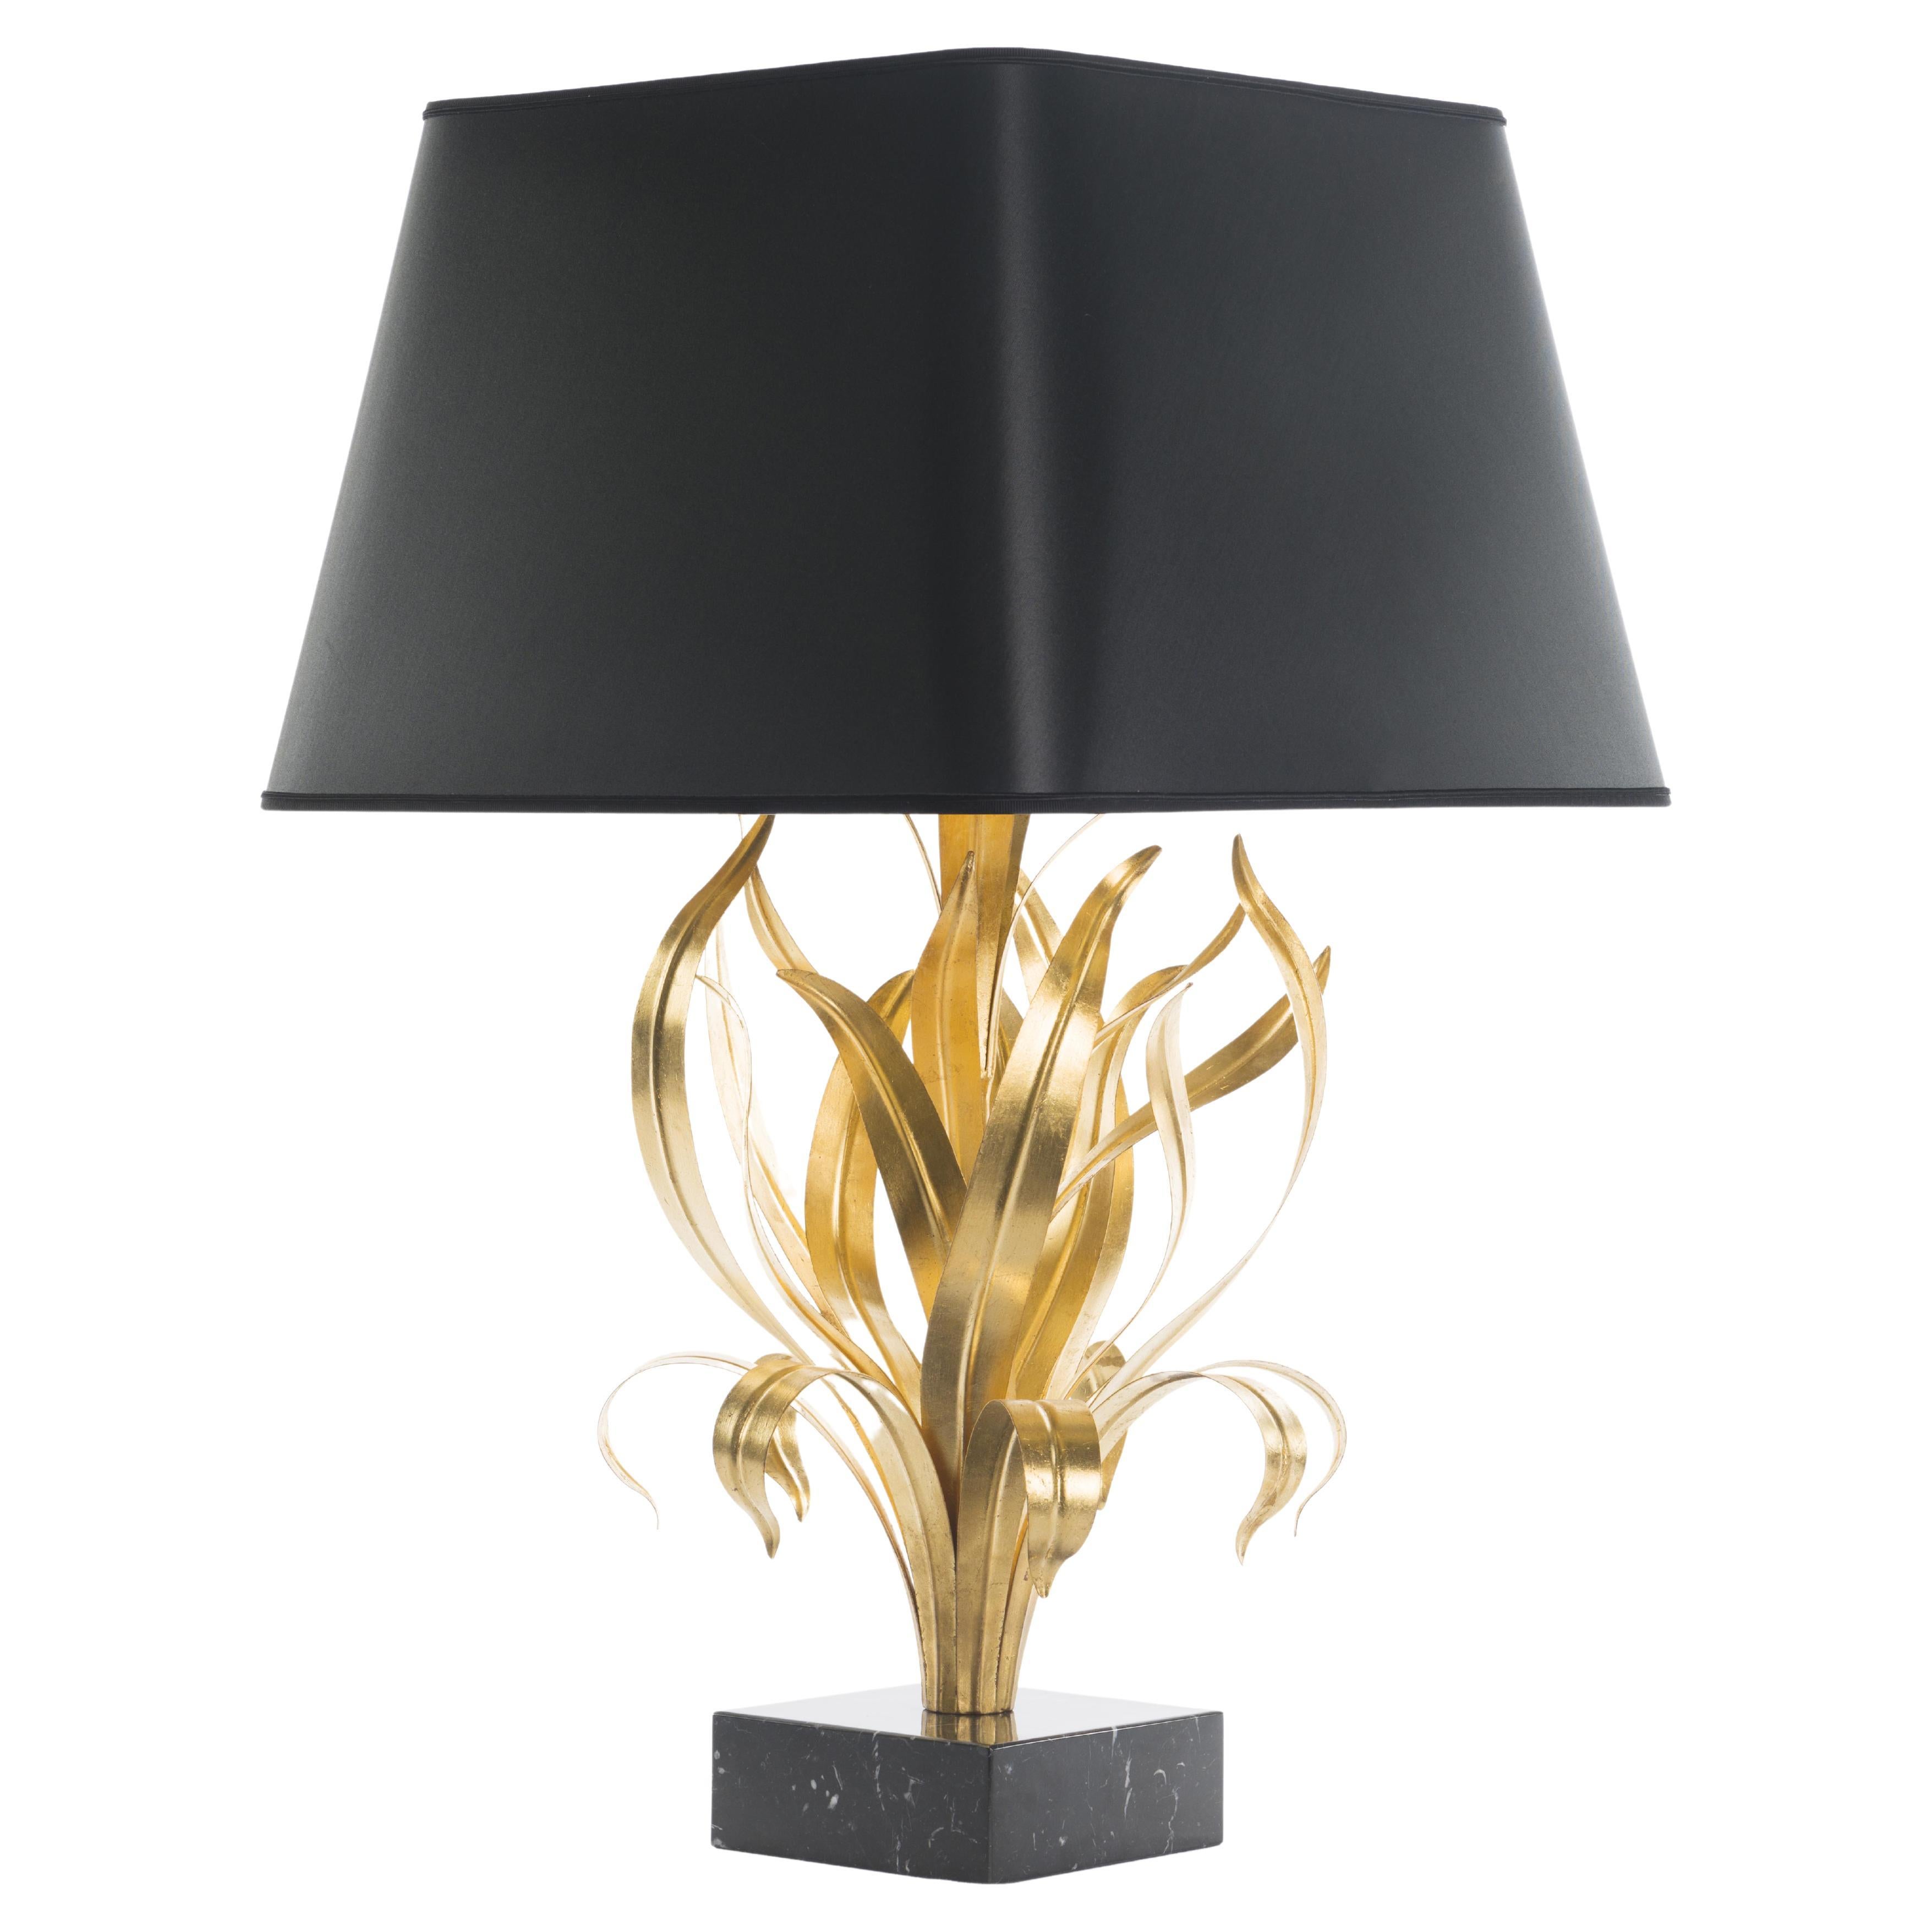 #121 Maison Baguès lamp, gilt gold finish. As seen at four seasons George V hotel in Paris.
Iron and gilt. Handmade in France.

Can order in both gilt gold or gilt silver. Can be UL listed for an extra fee.
Shade is available in white/cream or